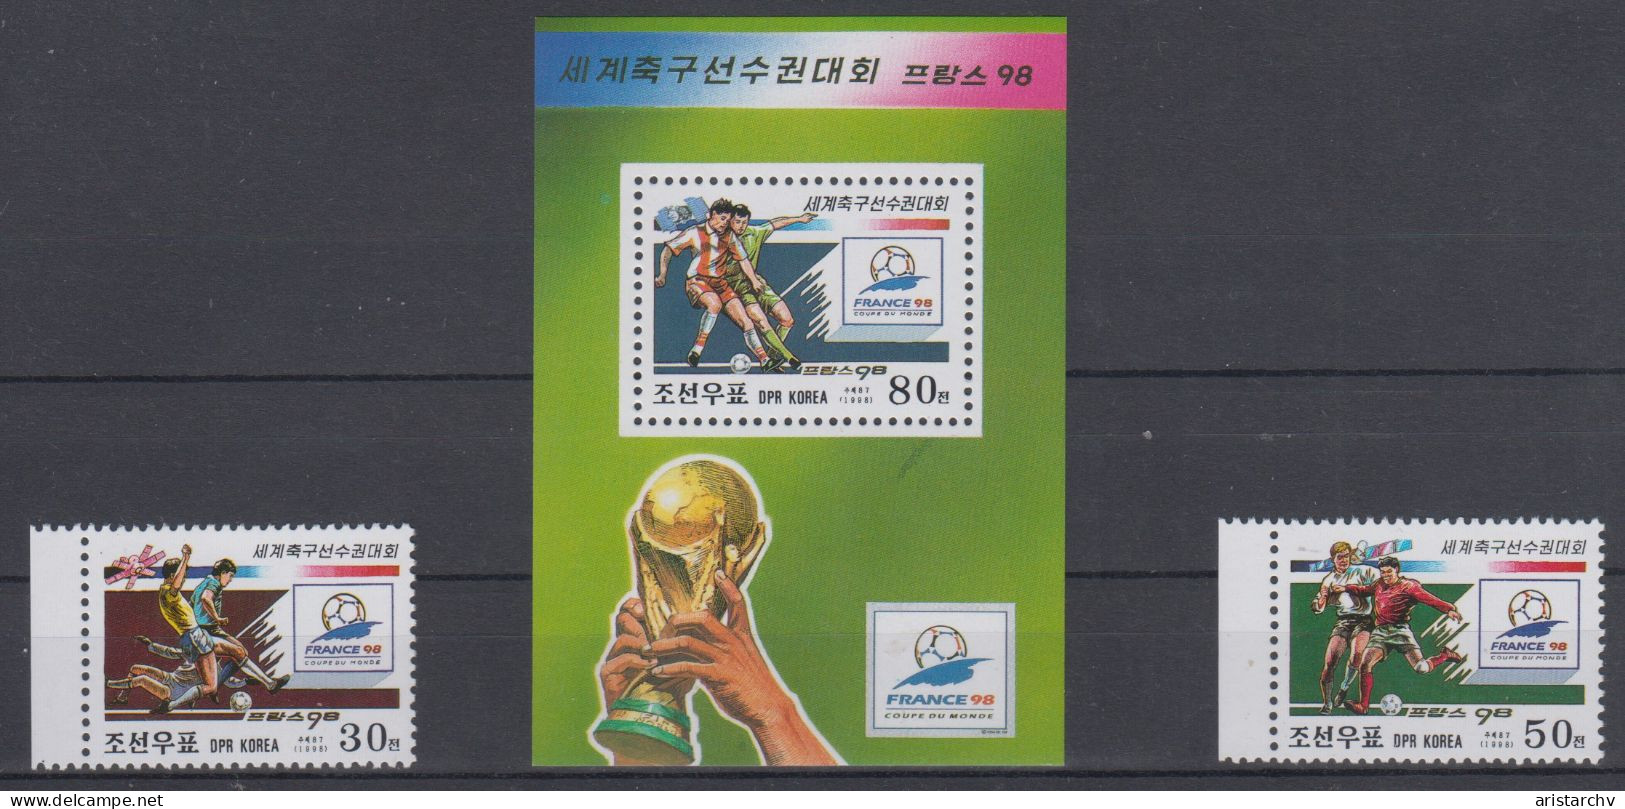 NORTH KOREA 1998 FOOTBALL WORLD CUP S/SHEET 2 STAMPS AND SHEETLET - 1998 – Frankreich